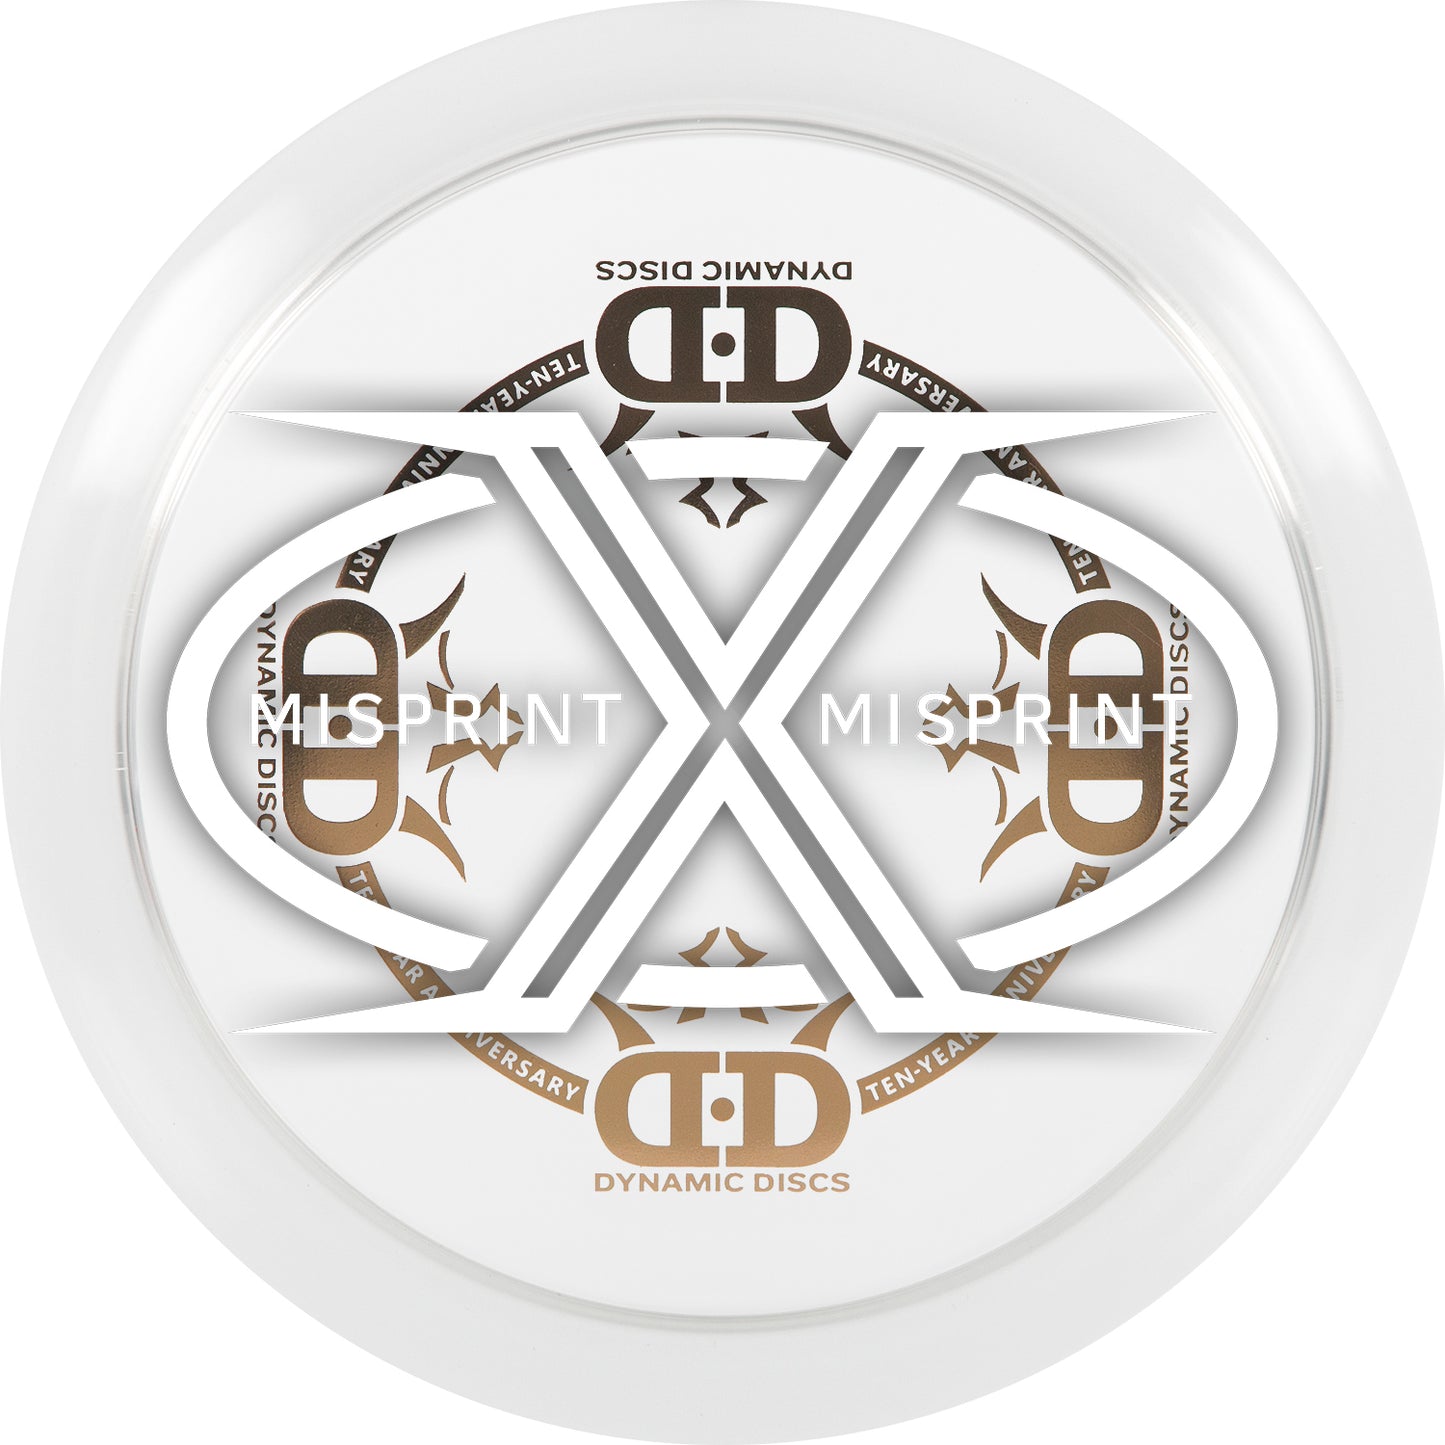 Misprint Dynamic Discs Lucid-Ice Escape 10 Year Anniversary Stamp